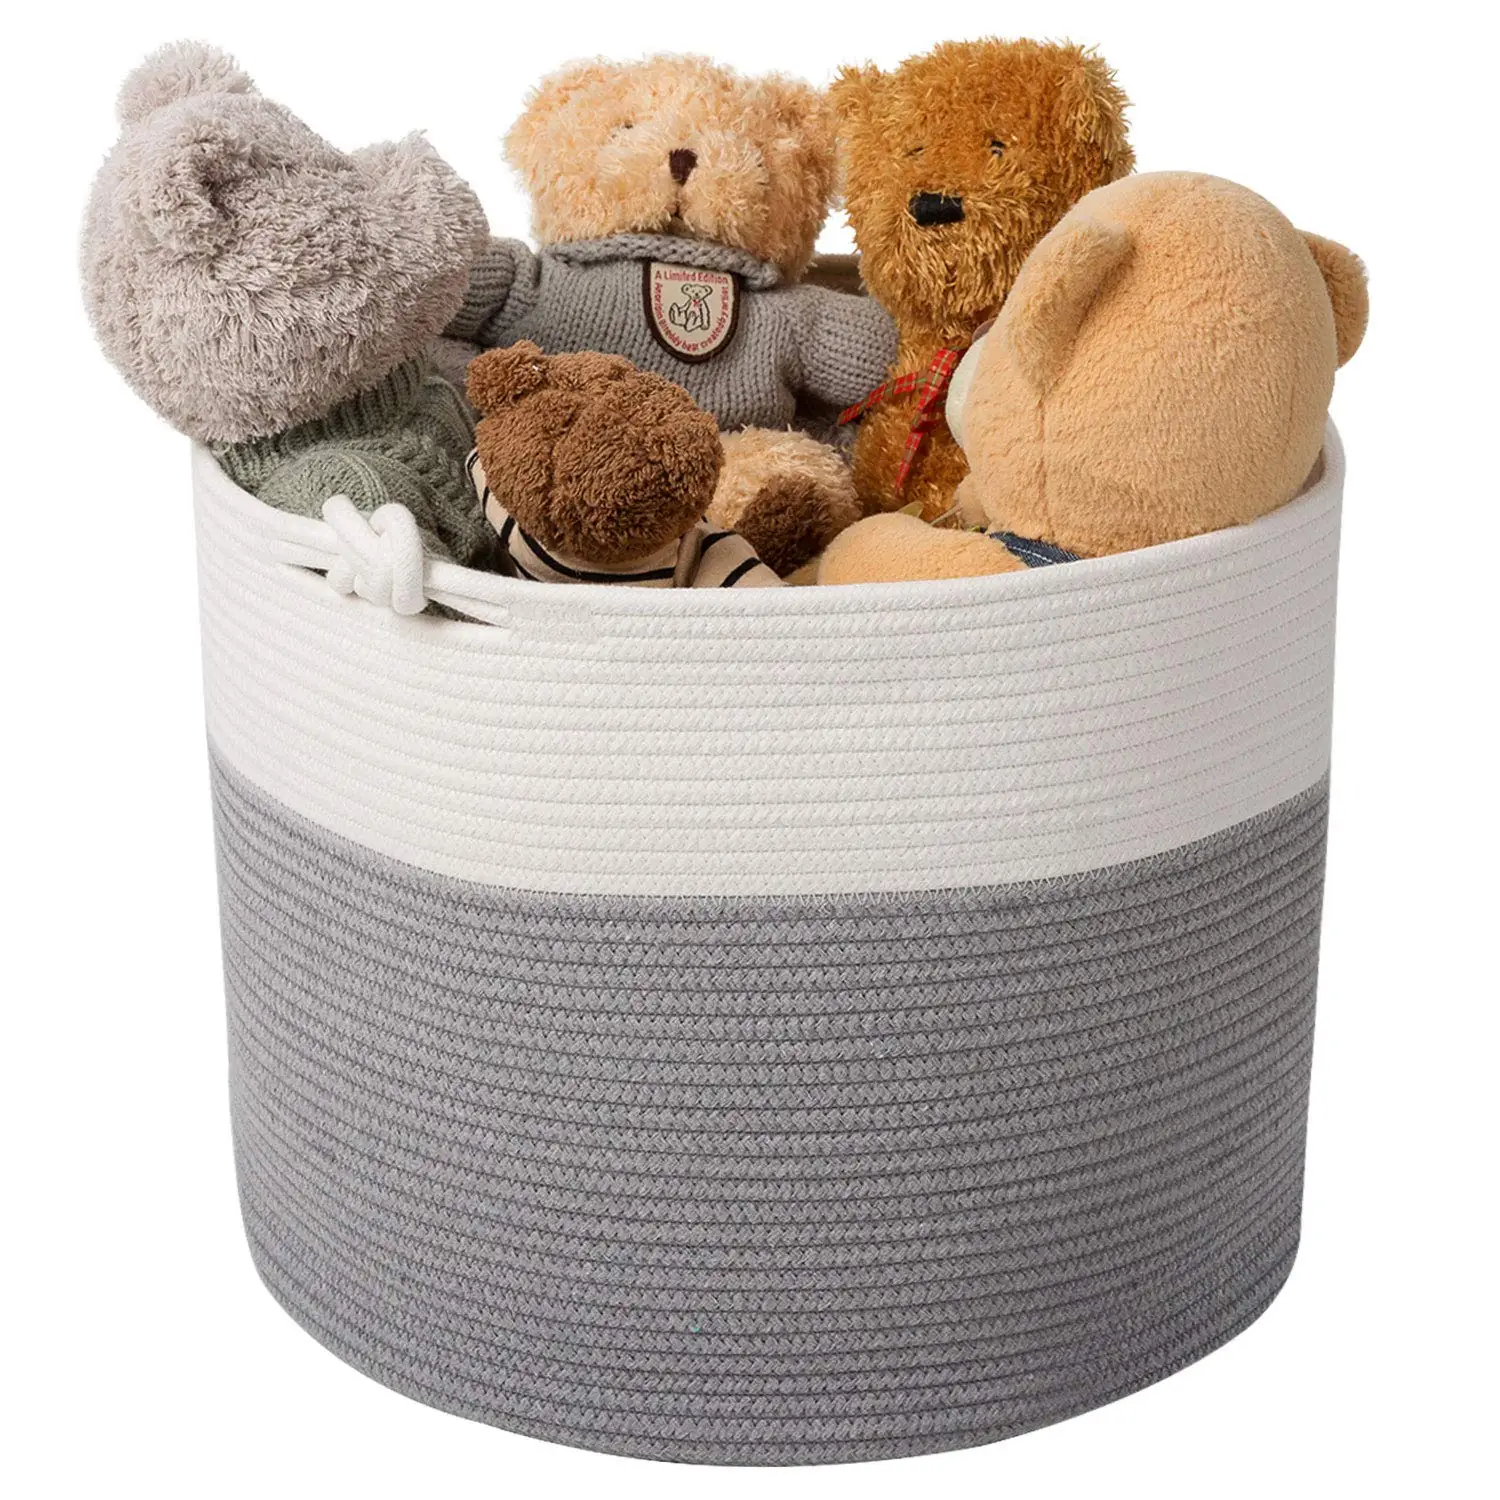 

Extra Large Woven Cotton Rope Organizer Baby Laundry Baskets for Blanket Toys Towels Nursery Hamper with Handle Storage Basket, Grey